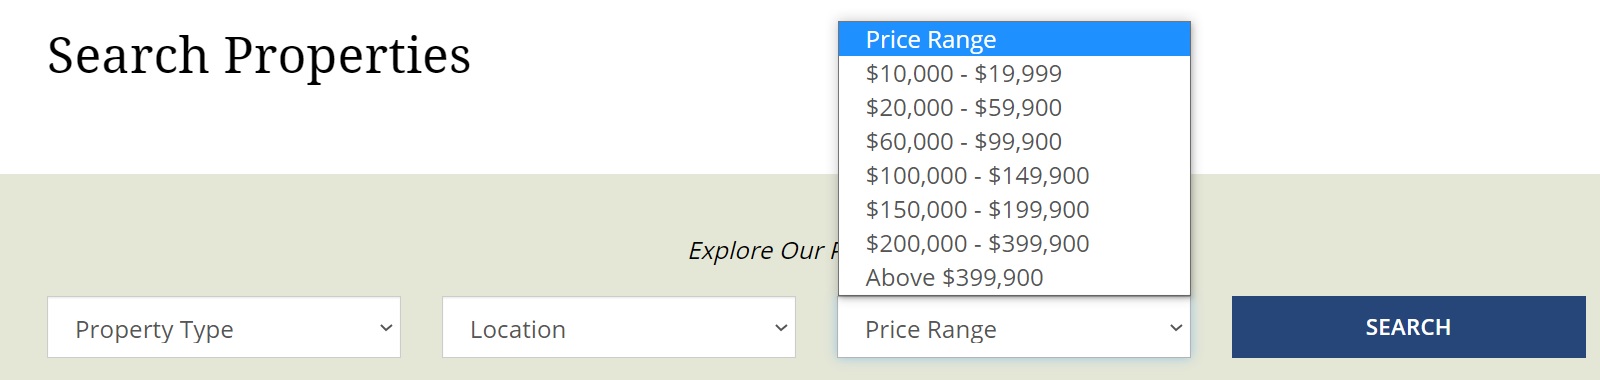 new york web design image of price range filter with options for 10000 to 19999 20000 to 59900 60000 to 99000 100000 to 149900 150000 to 199900 200000 to 399900 and above 399900